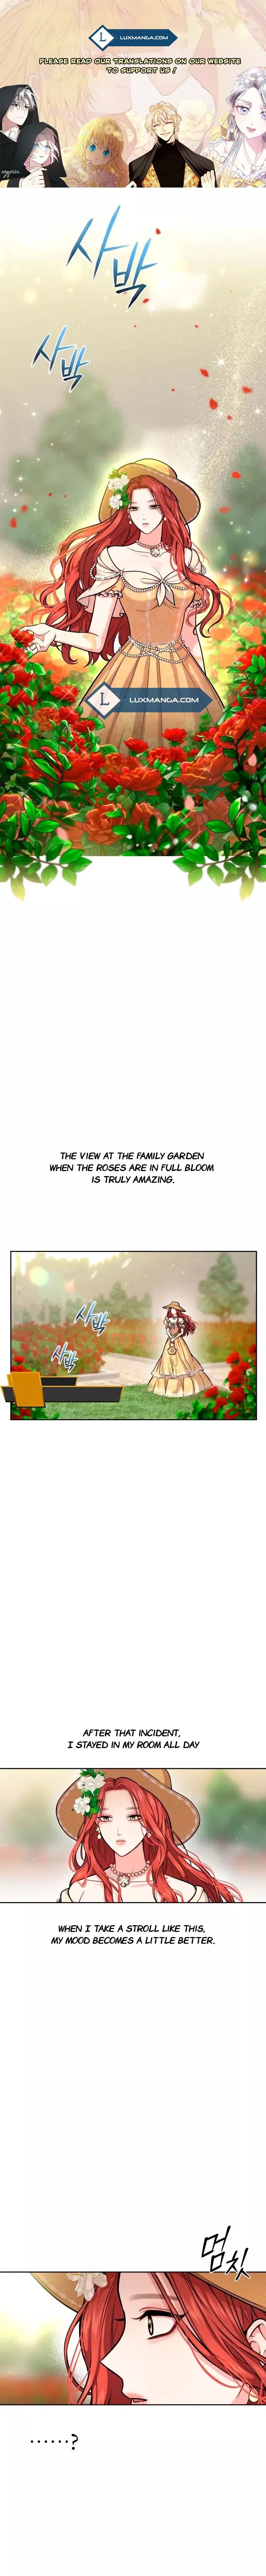 The Secret Bedroom of a Dejected Royal Daughter chapter 20